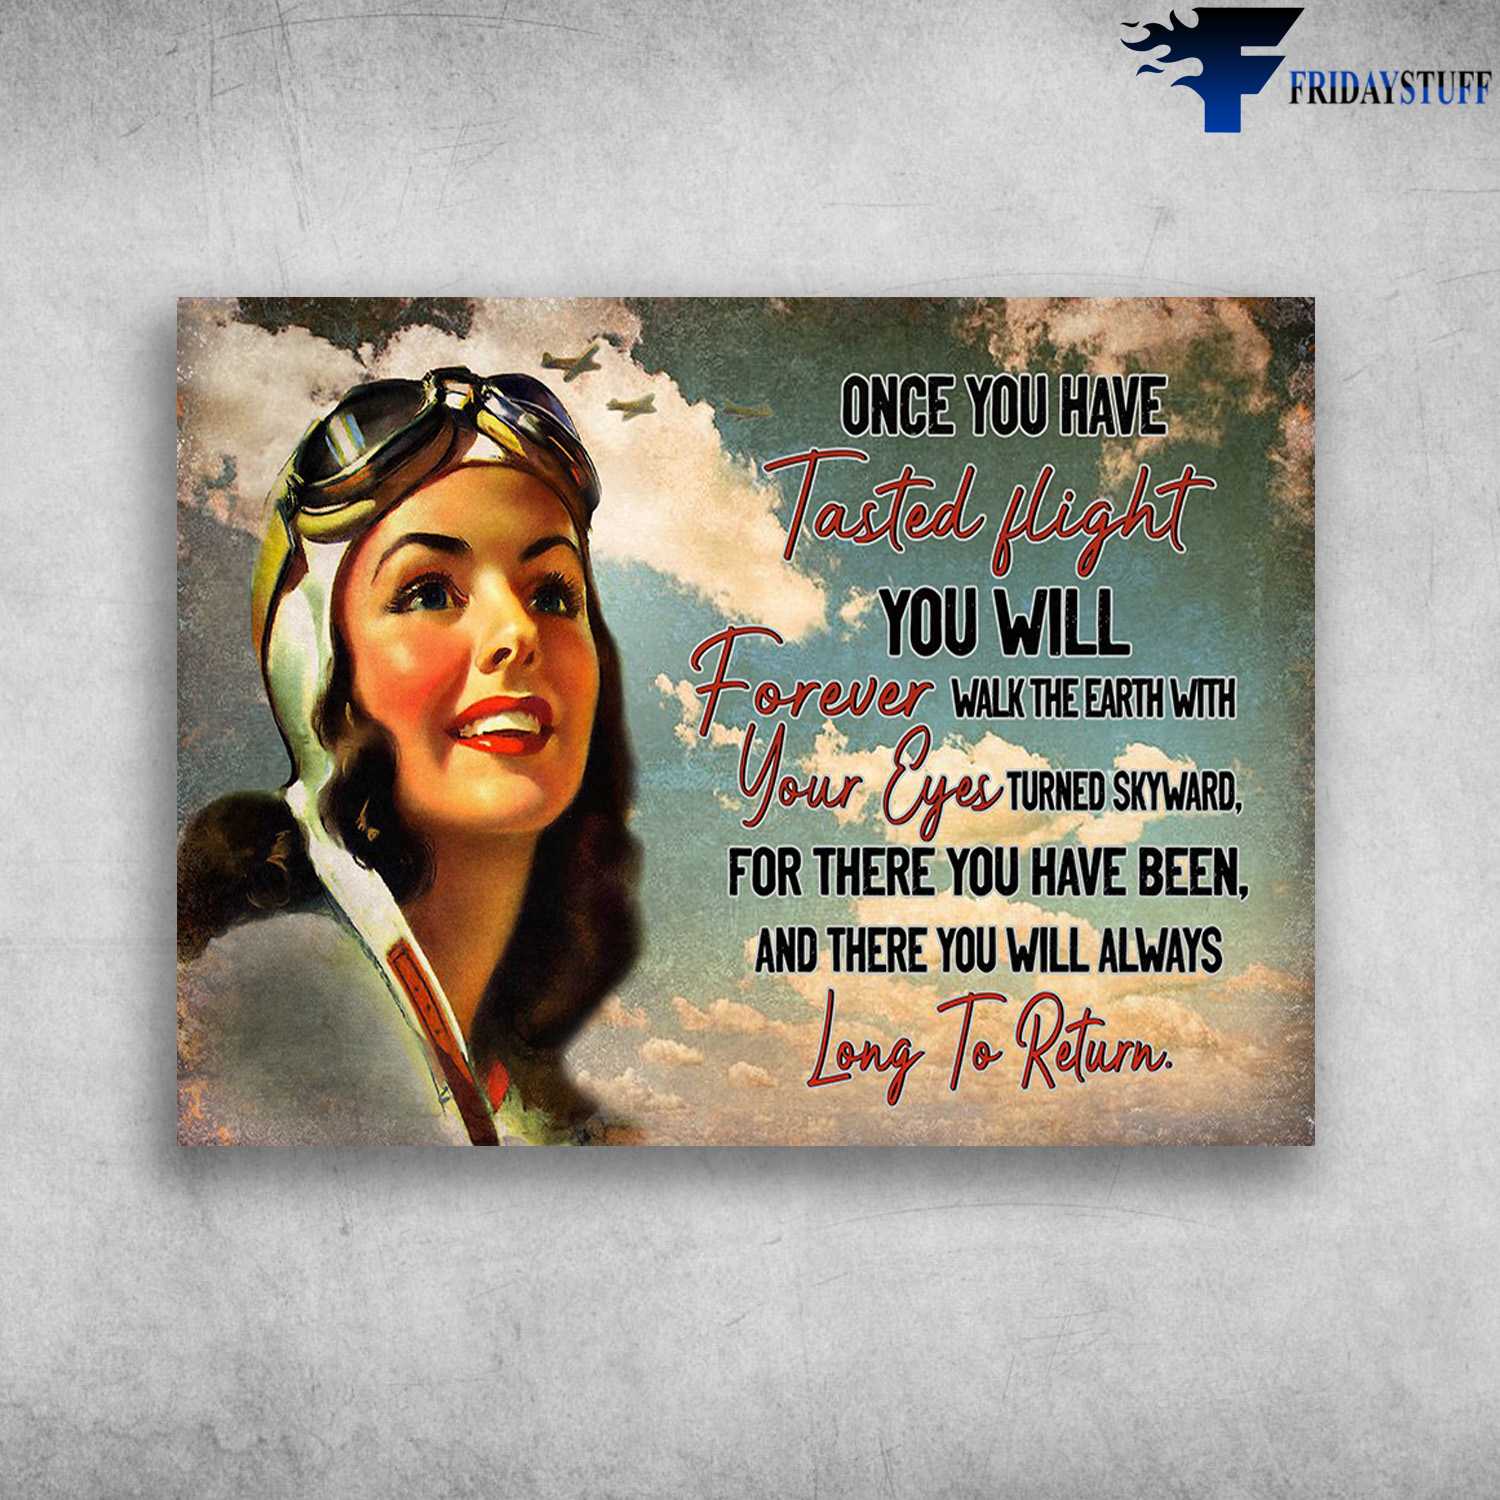 Female Pilot - Once You Have Táted Flight, You Will Forever Walk The Earth With, Your Eyes Turned Skyward